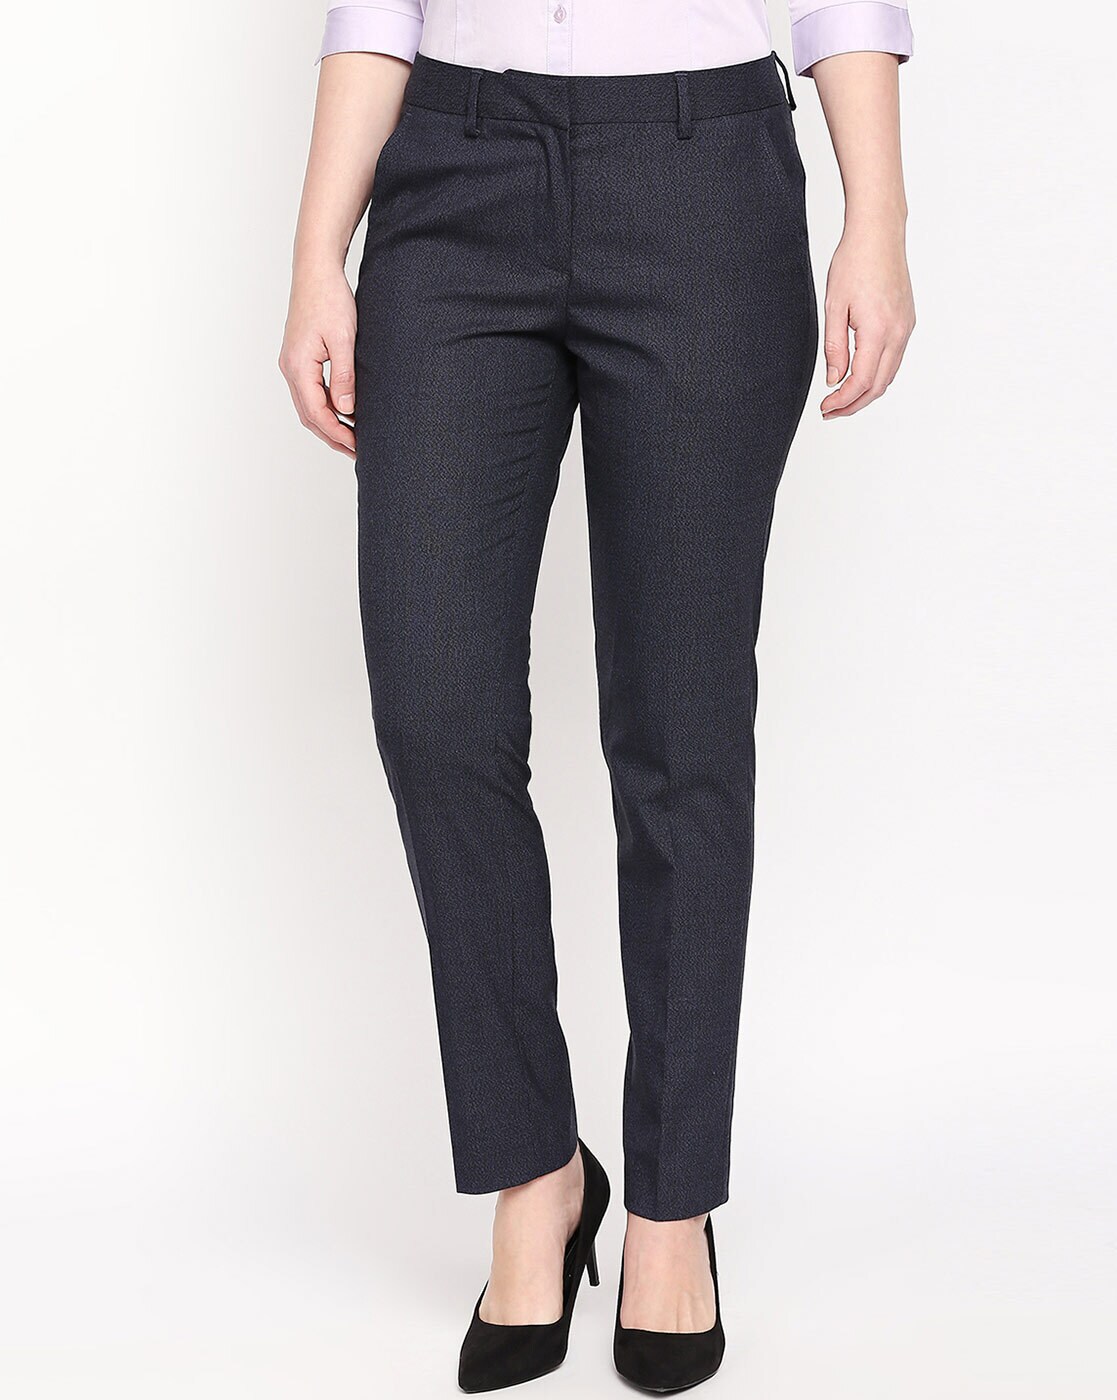 Buy GREY Trousers  Pants for Women by Annabelle by Pantaloons Online   Ajiocom